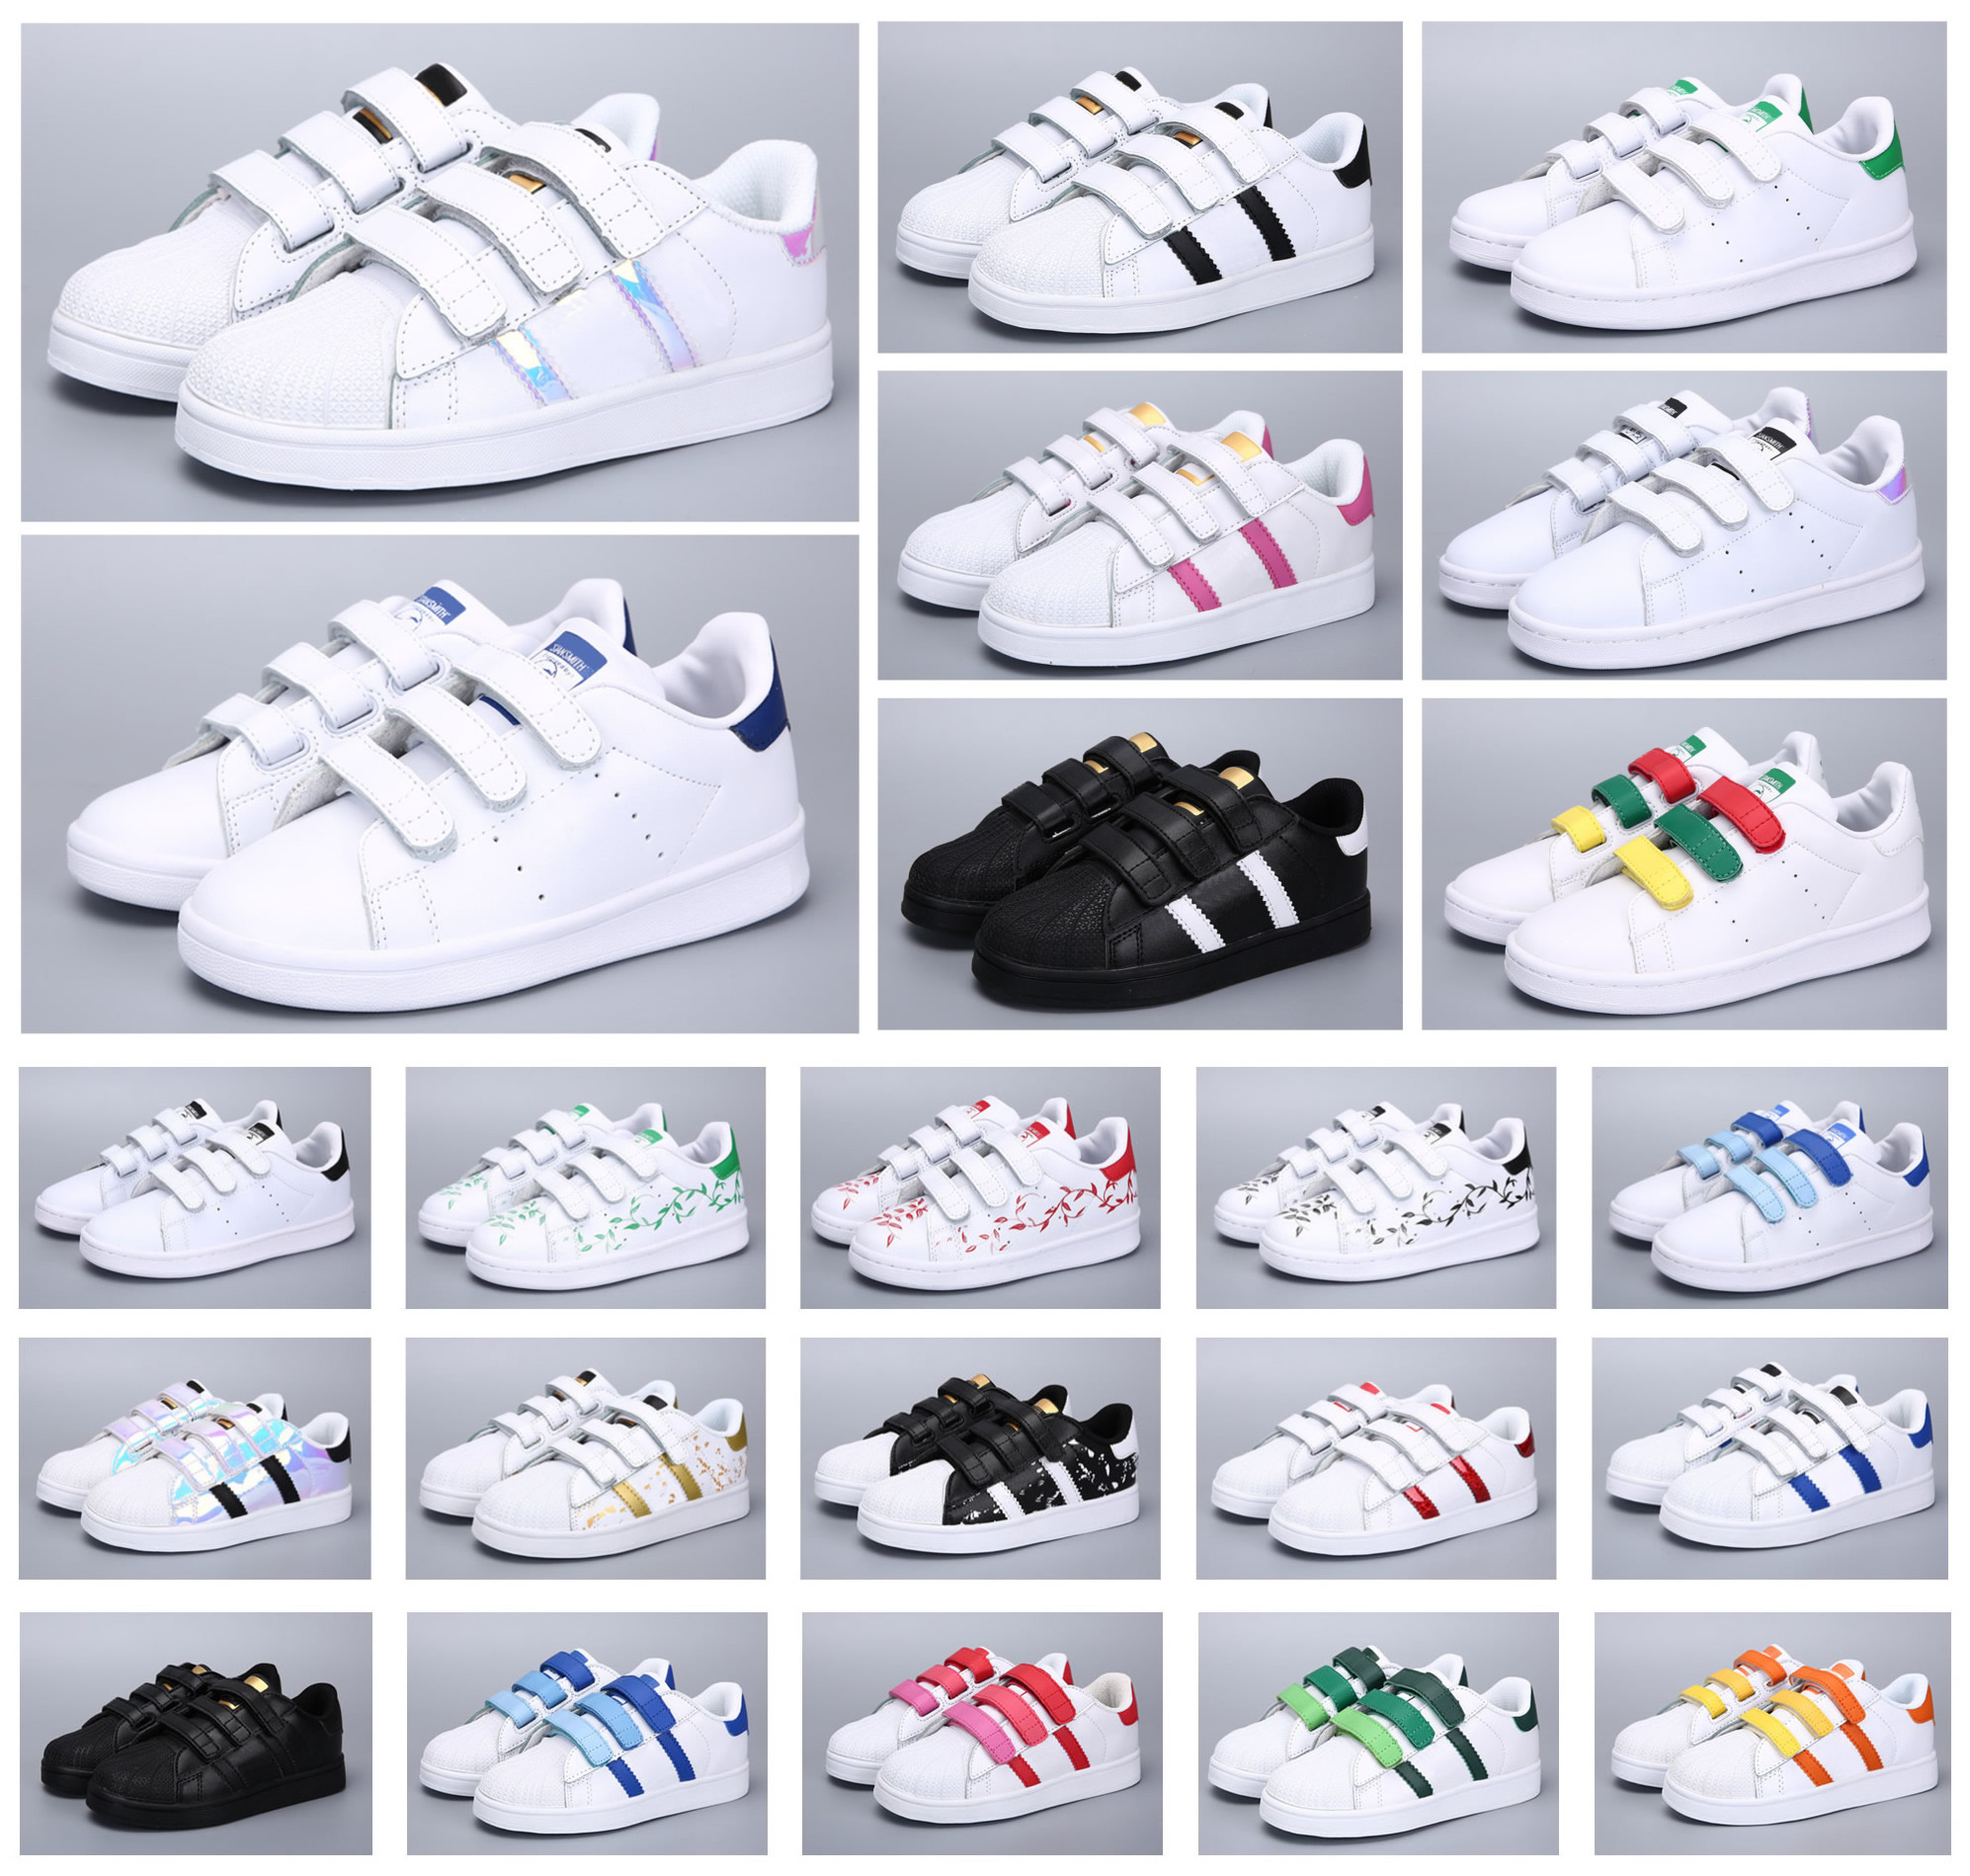 

Hot Classics Children Stan Smith Shell Head Kids Youth Superstar Girls Child Boys Baby Shoes Casual Sport Sneakers Size 24-35, 17